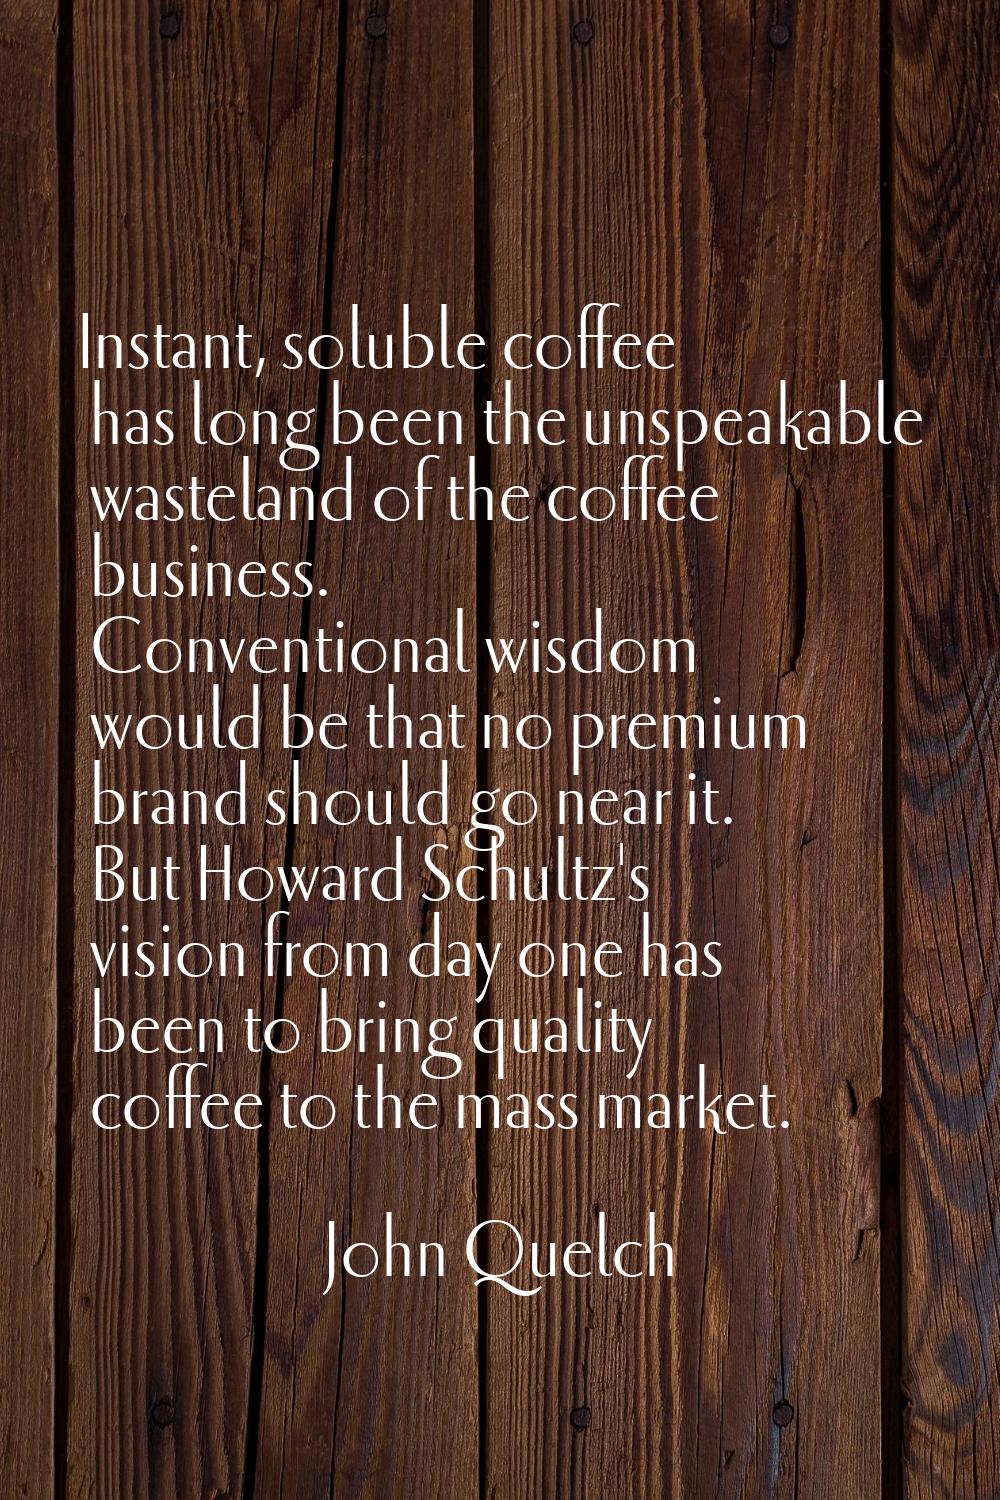 Instant, soluble coffee has long been the unspeakable wasteland of the coffee business. Conventiona